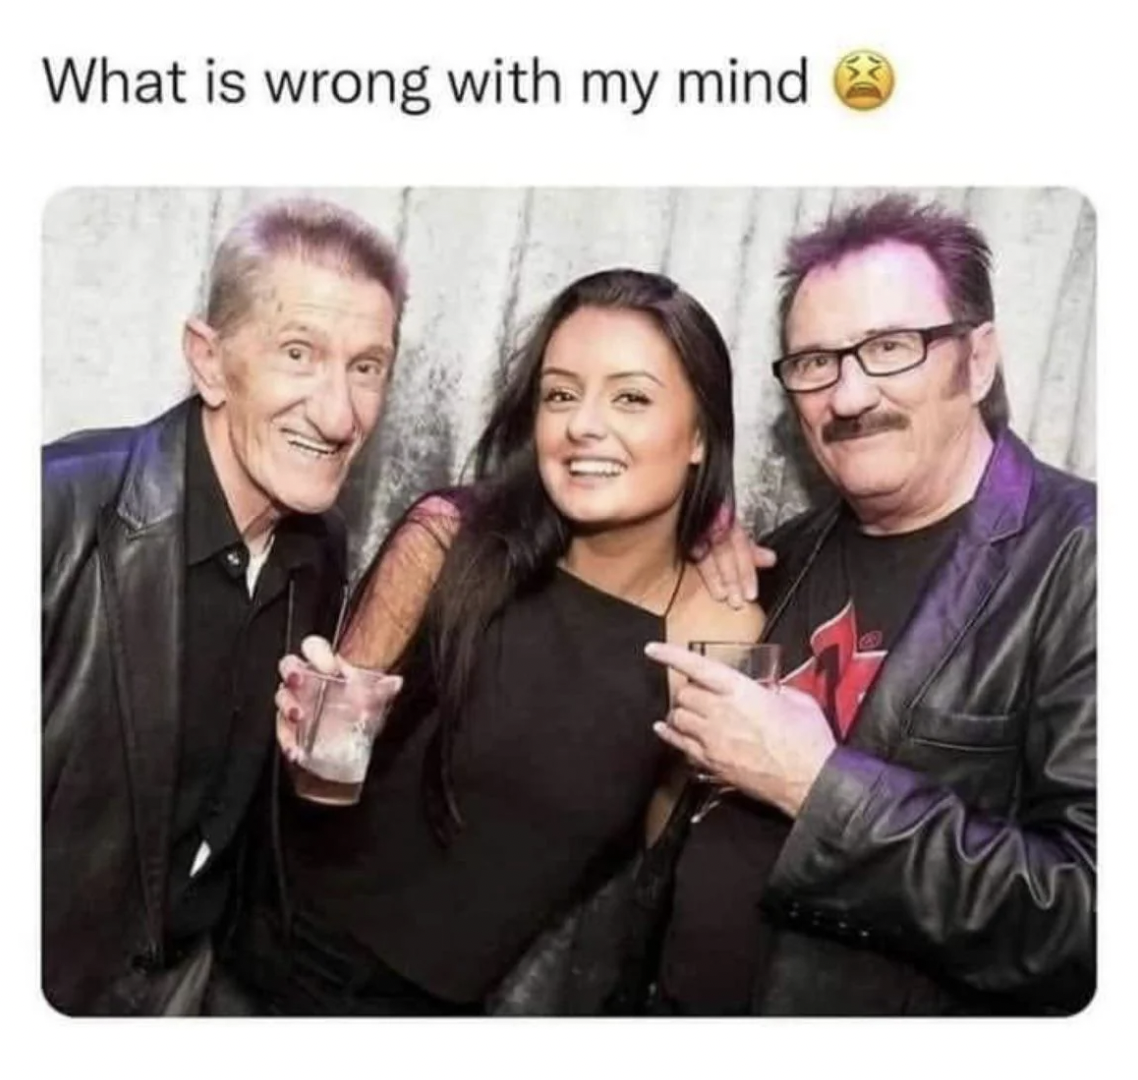 chuckle brothers optical illusion - What is wrong with my mind Ty